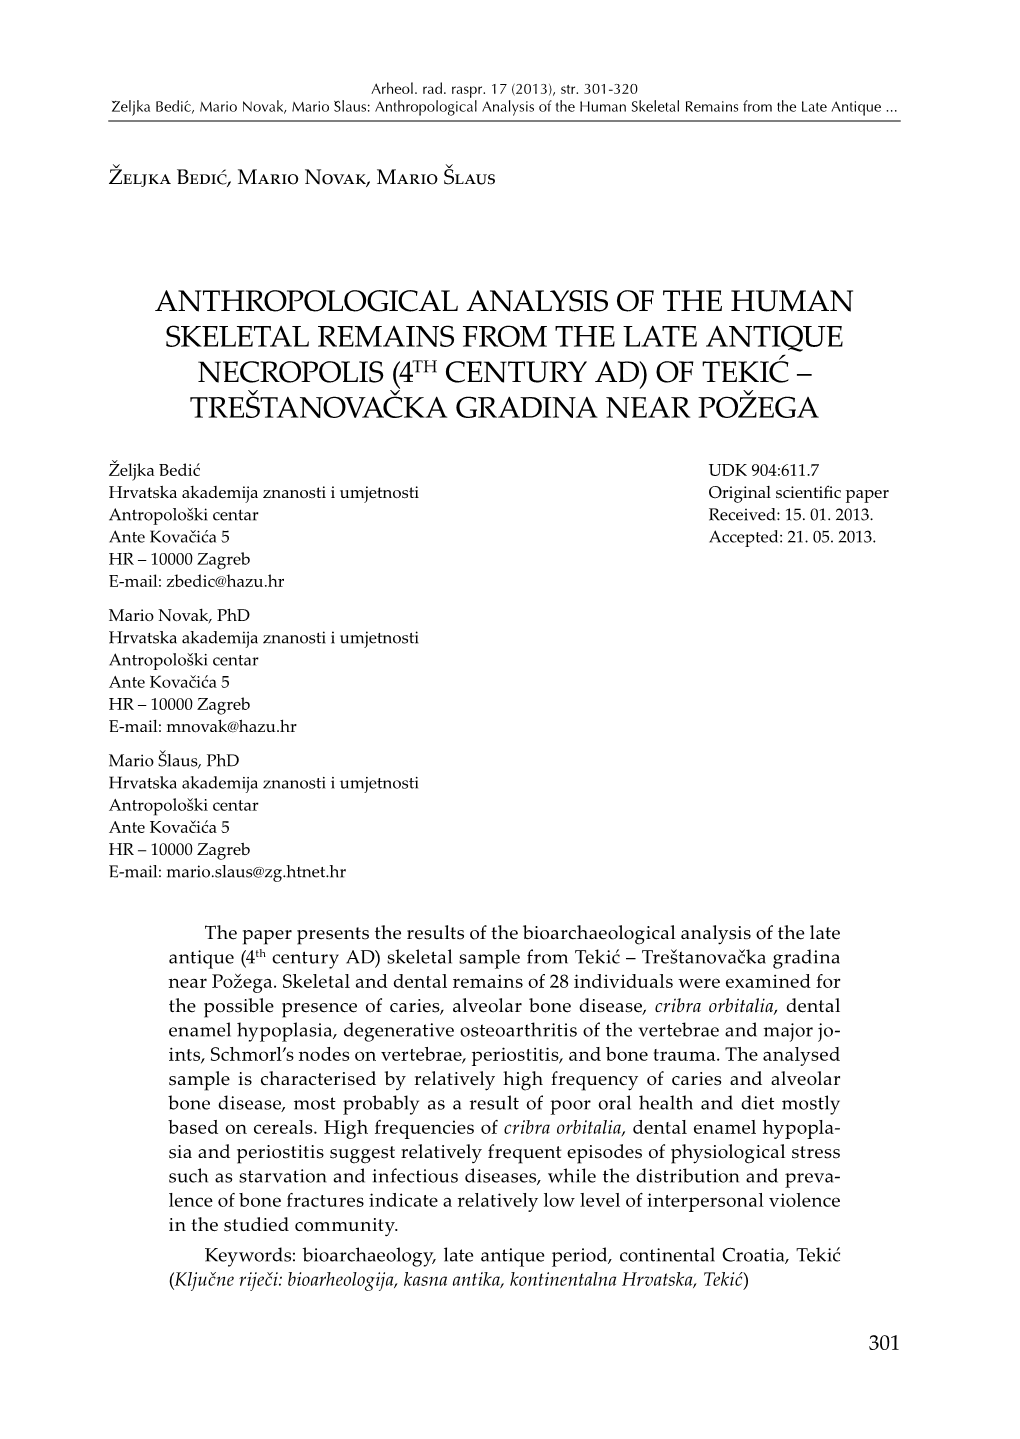 Anthropological Analysis of the Human Skeletal Remains from the Late Antique